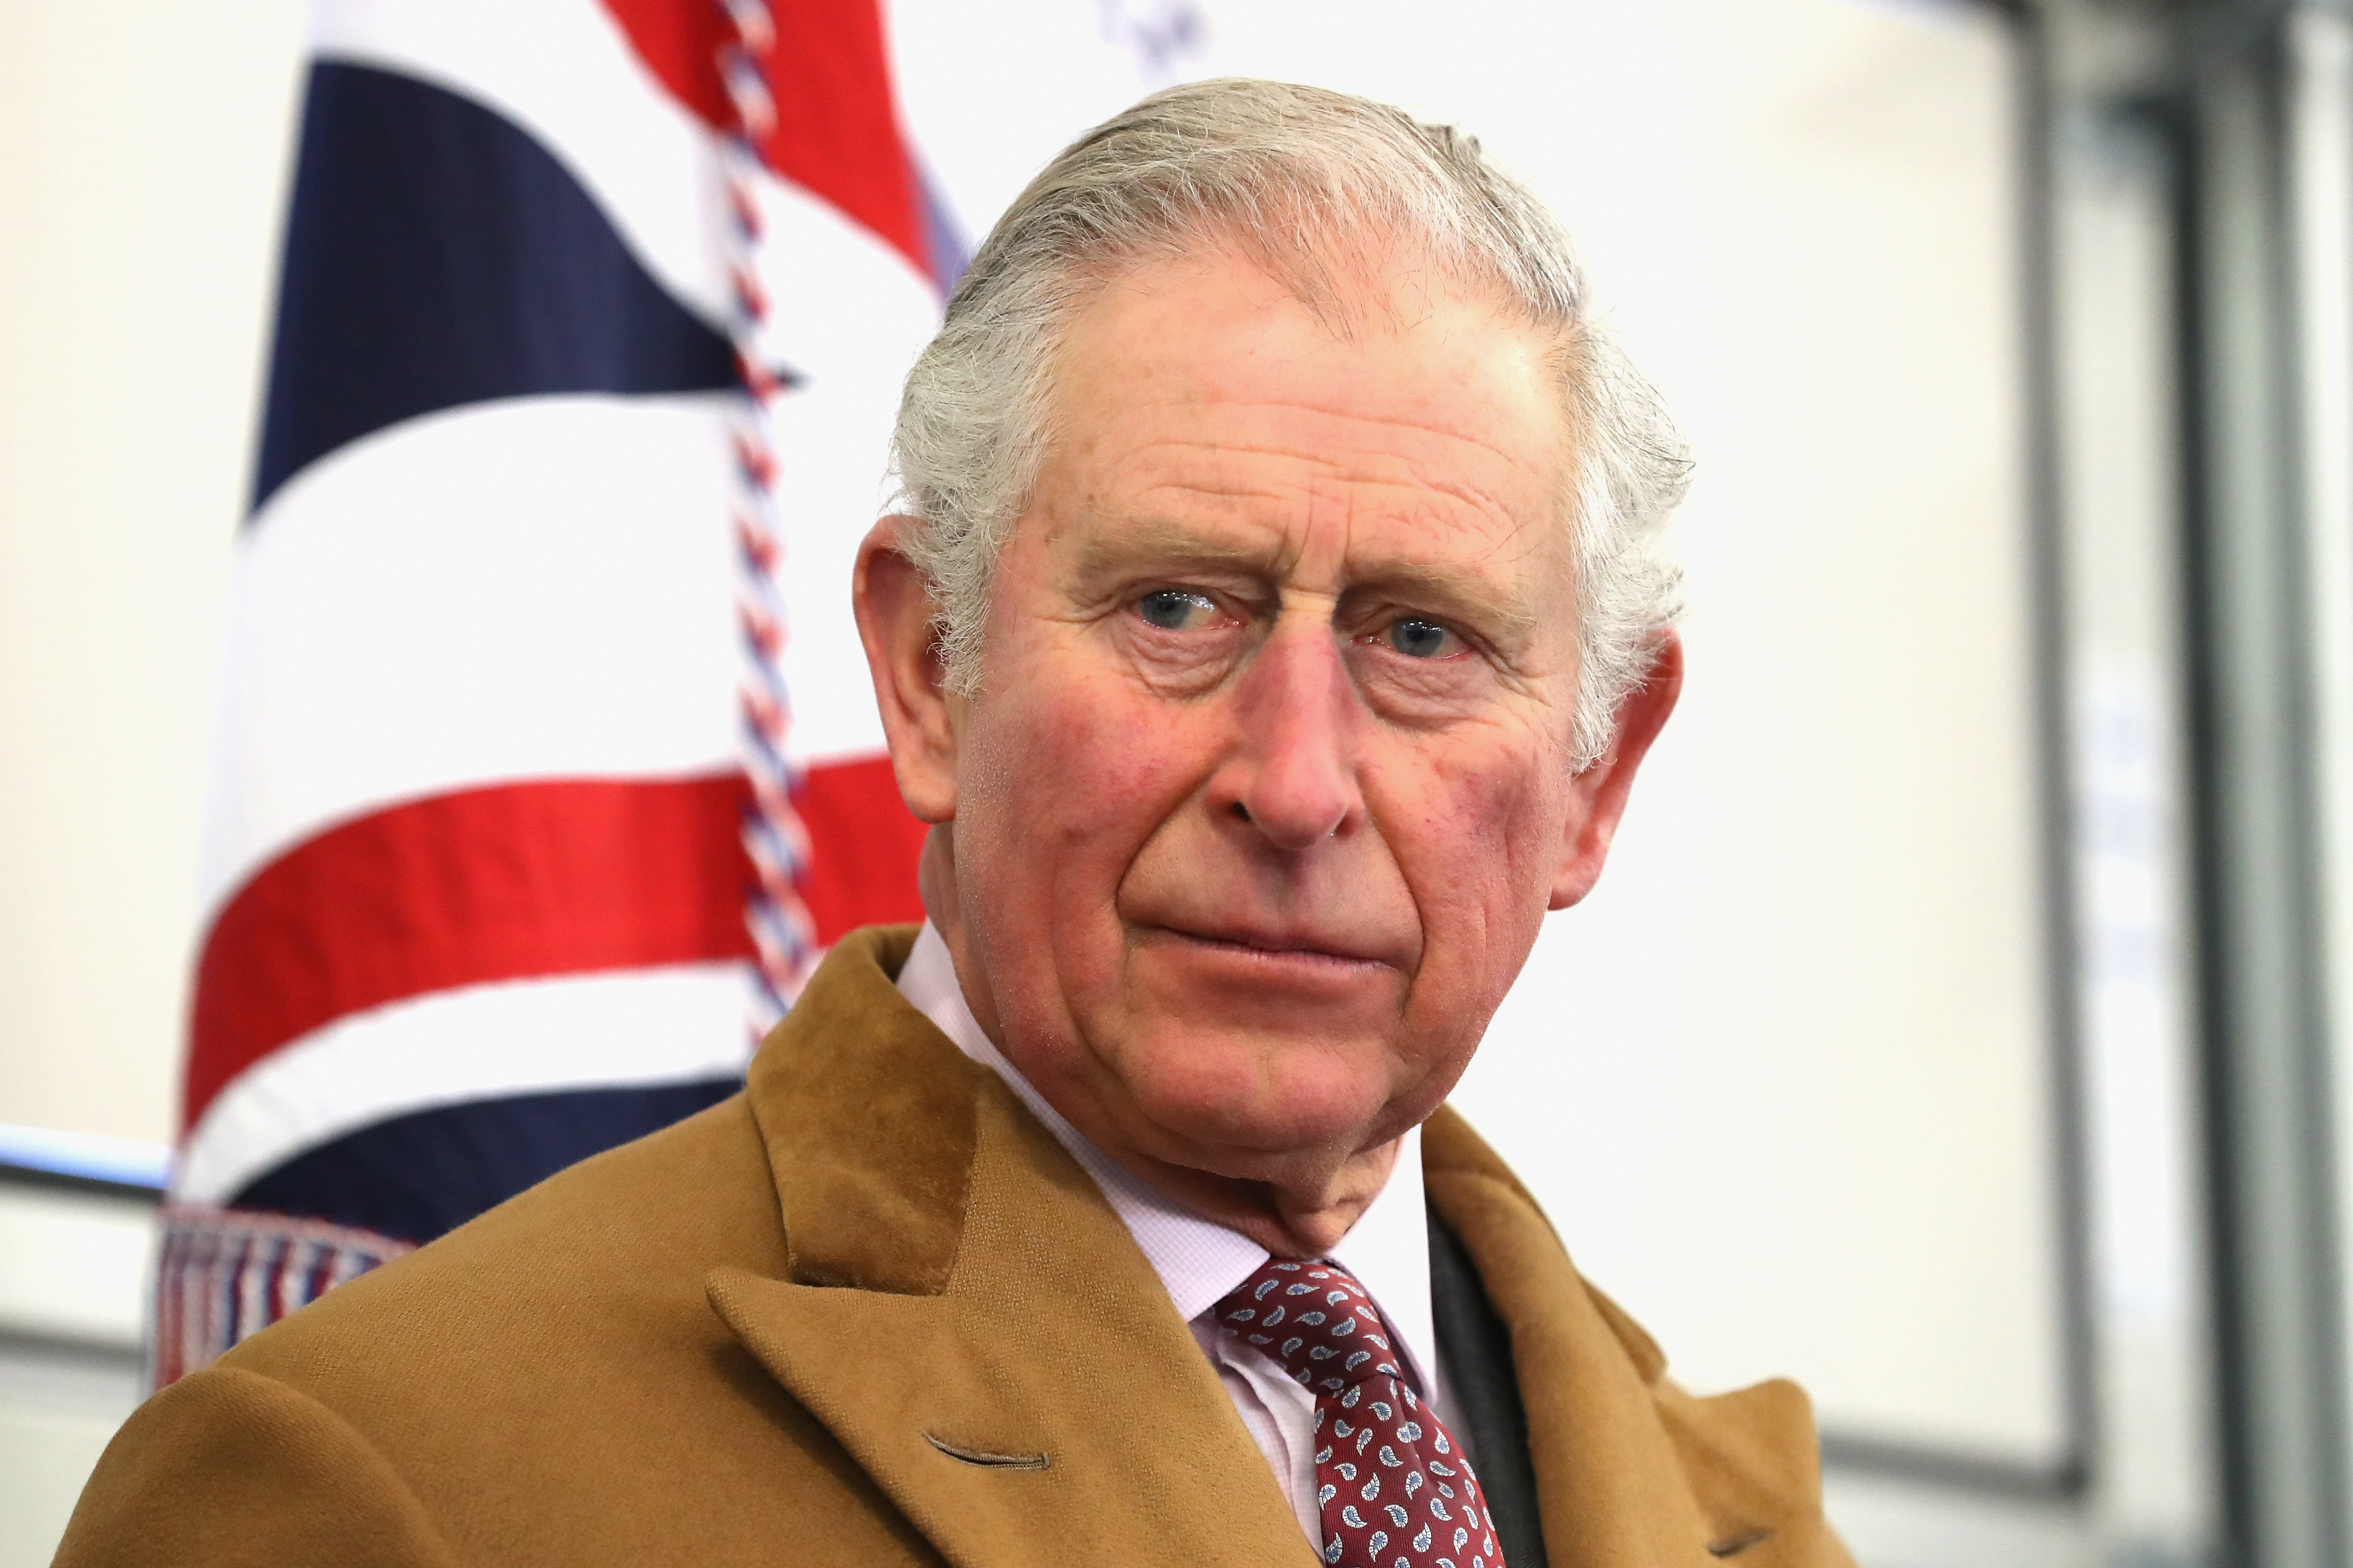 King Charles III, former Prince of Wales, at Emergency Service Station at Barnard Castle on February 15, 2018 | Source: Getty Images